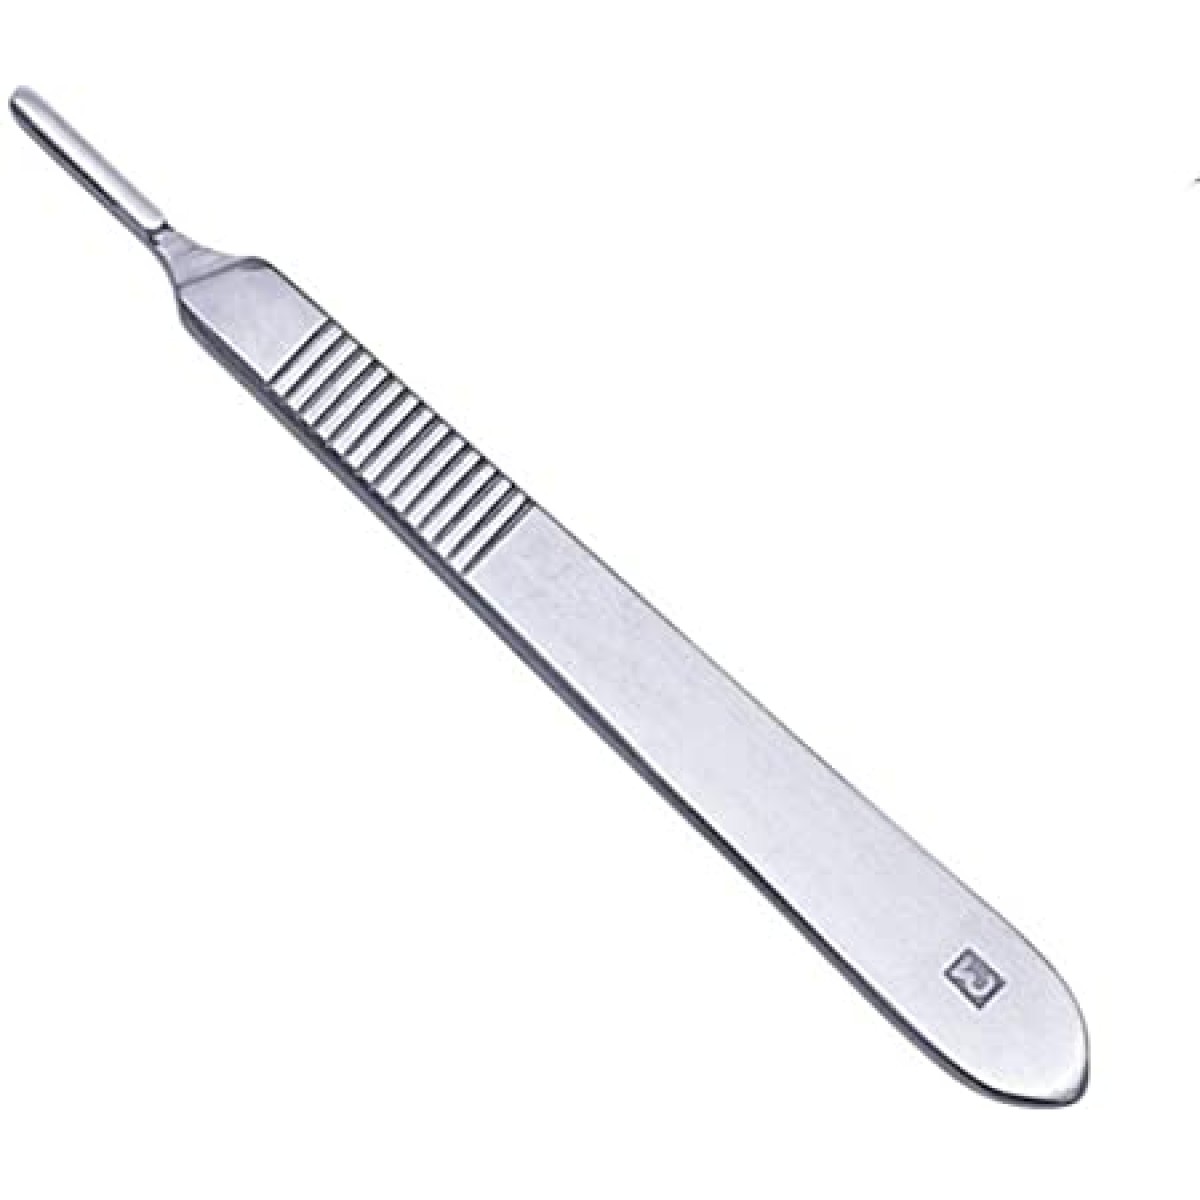 Surgical Scalpel Handle